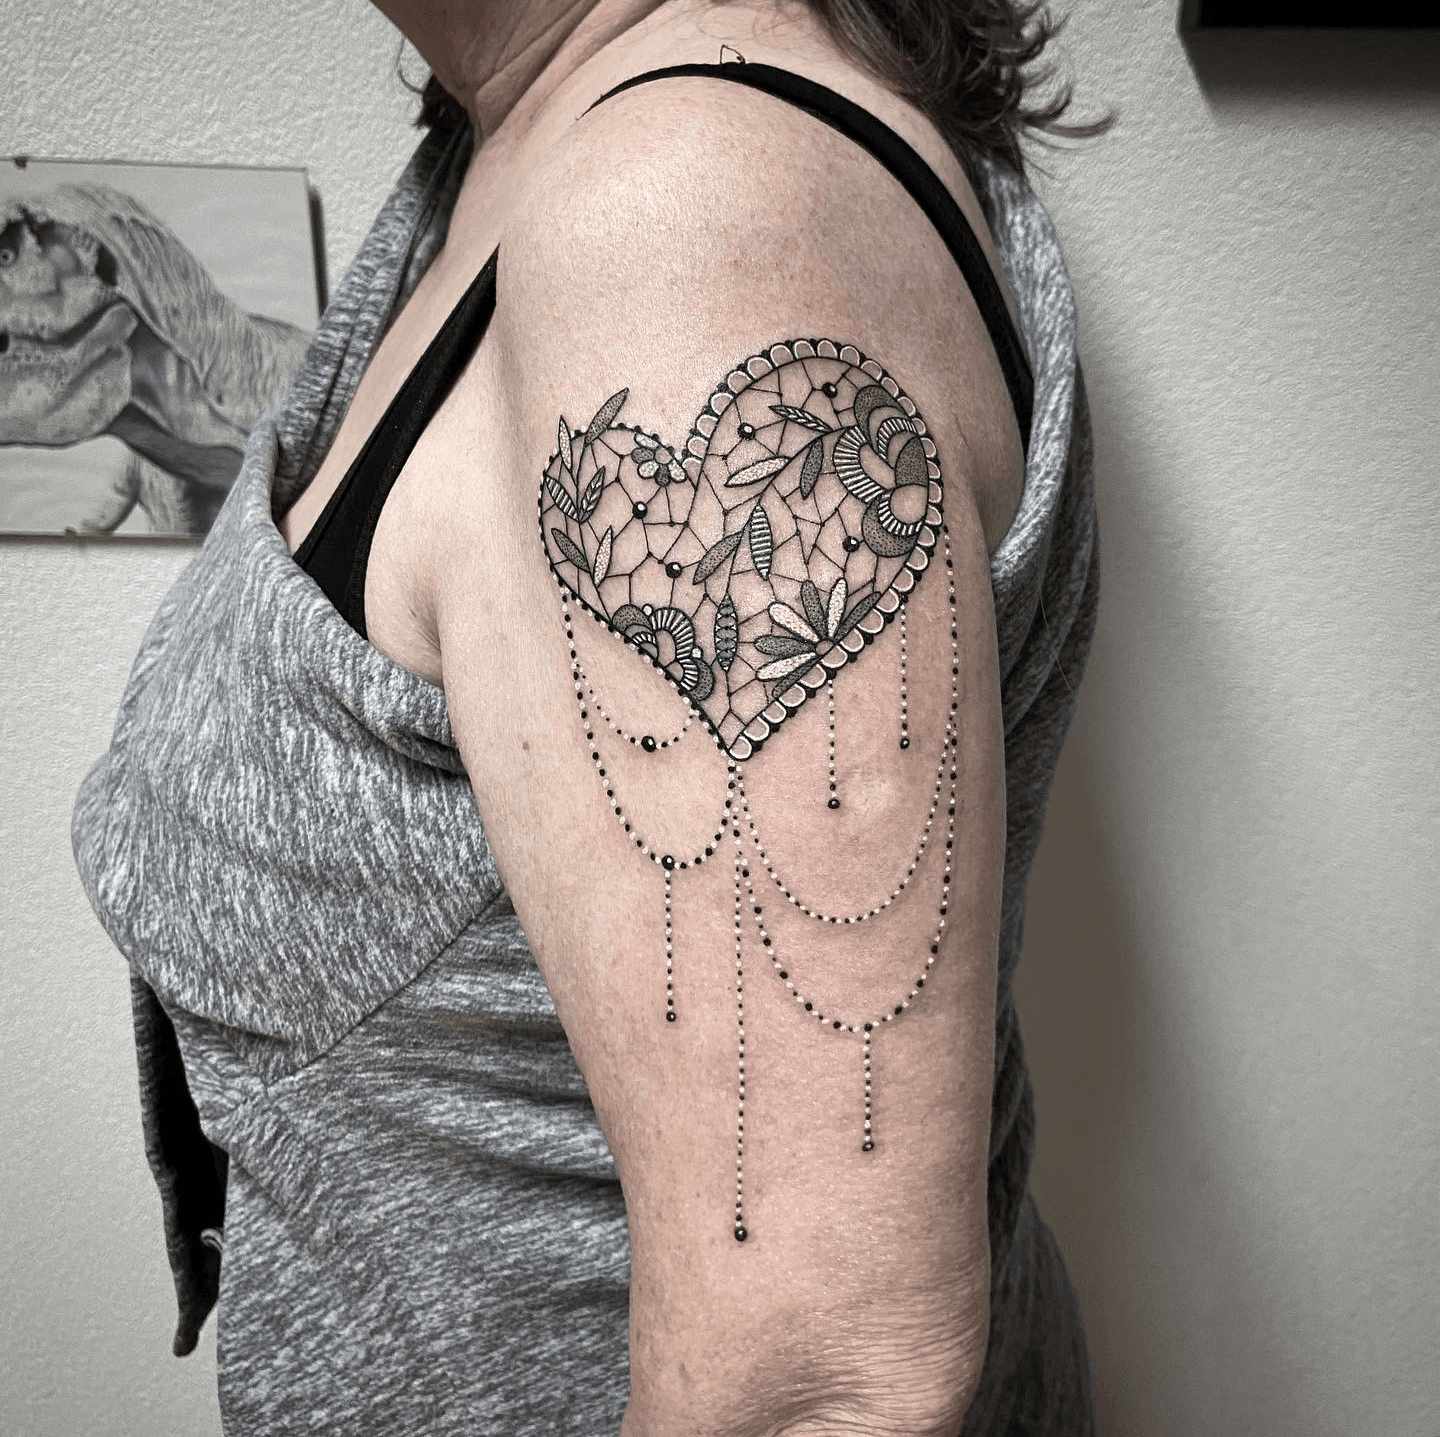 Floral heart tattoo on the back of the left thigh